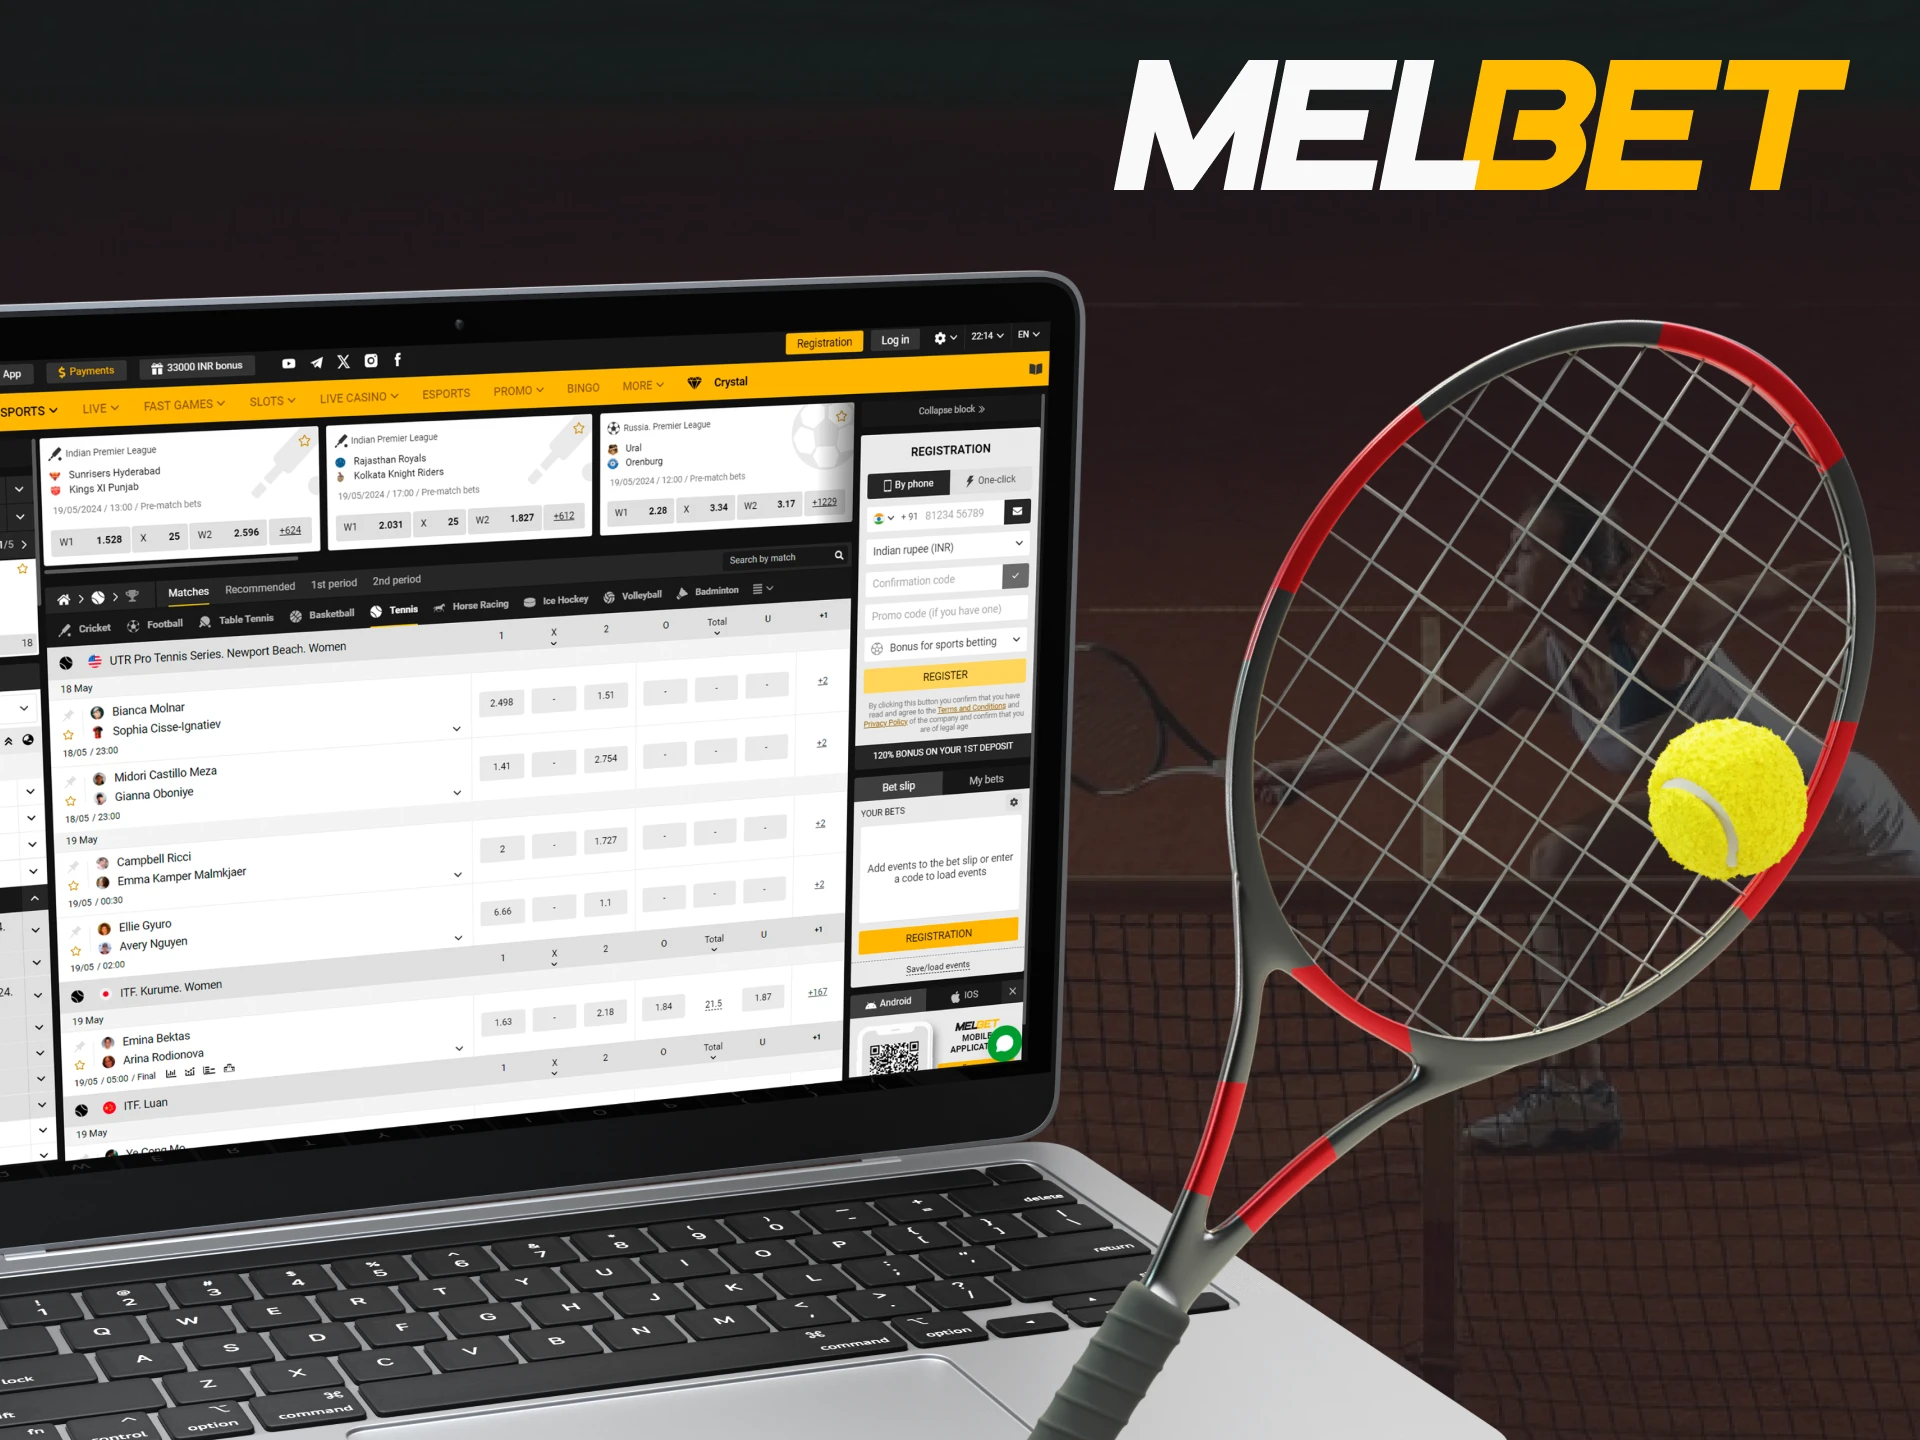 Place bets on tennis and win at Melbet.